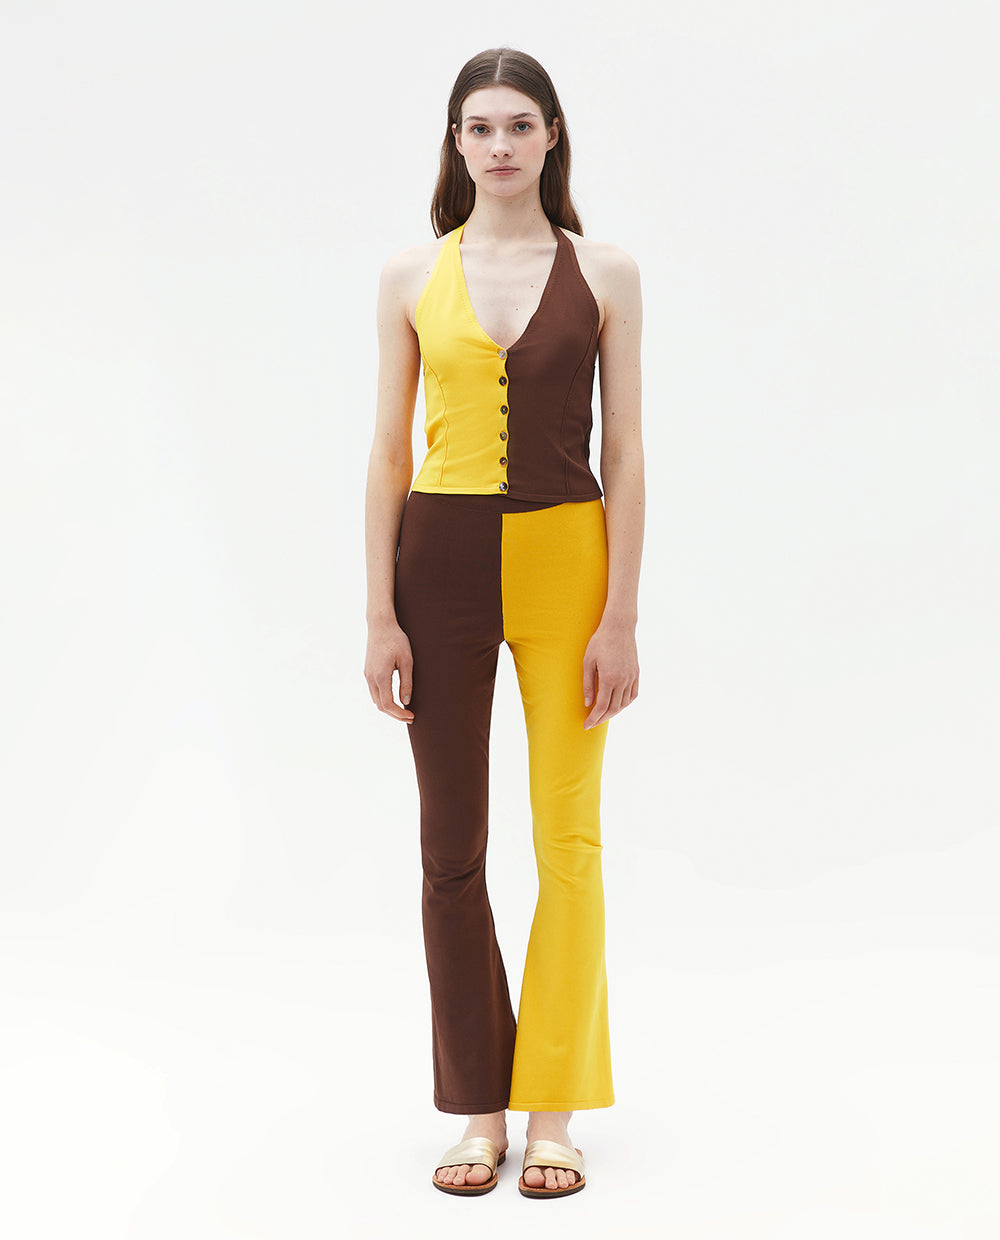 BROWN YELLOW TROUSERS